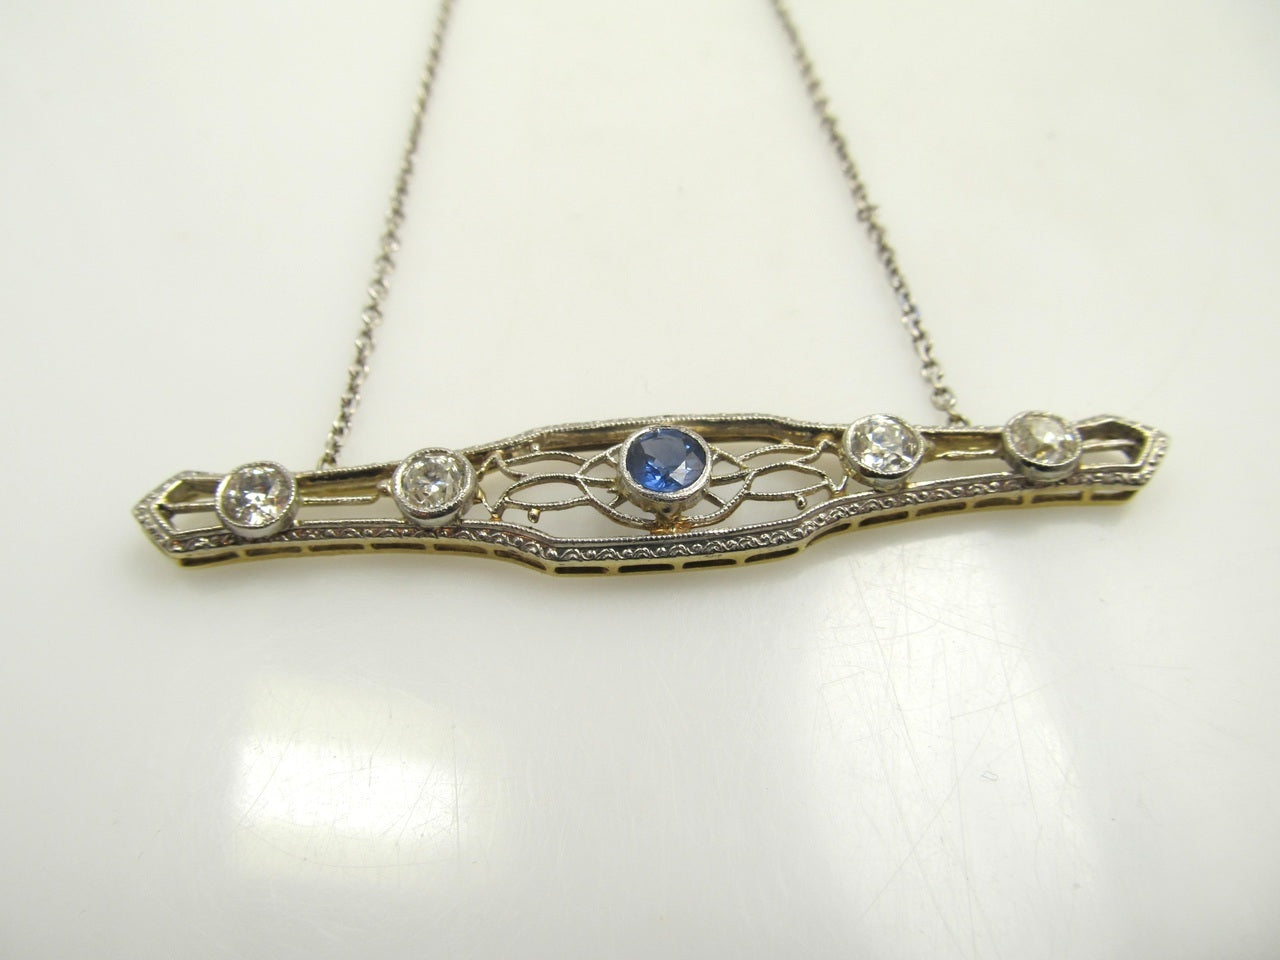 14k White Gold Necklace With 1ct In Diamonds And A 1ct Sapphire, Circa 1920.